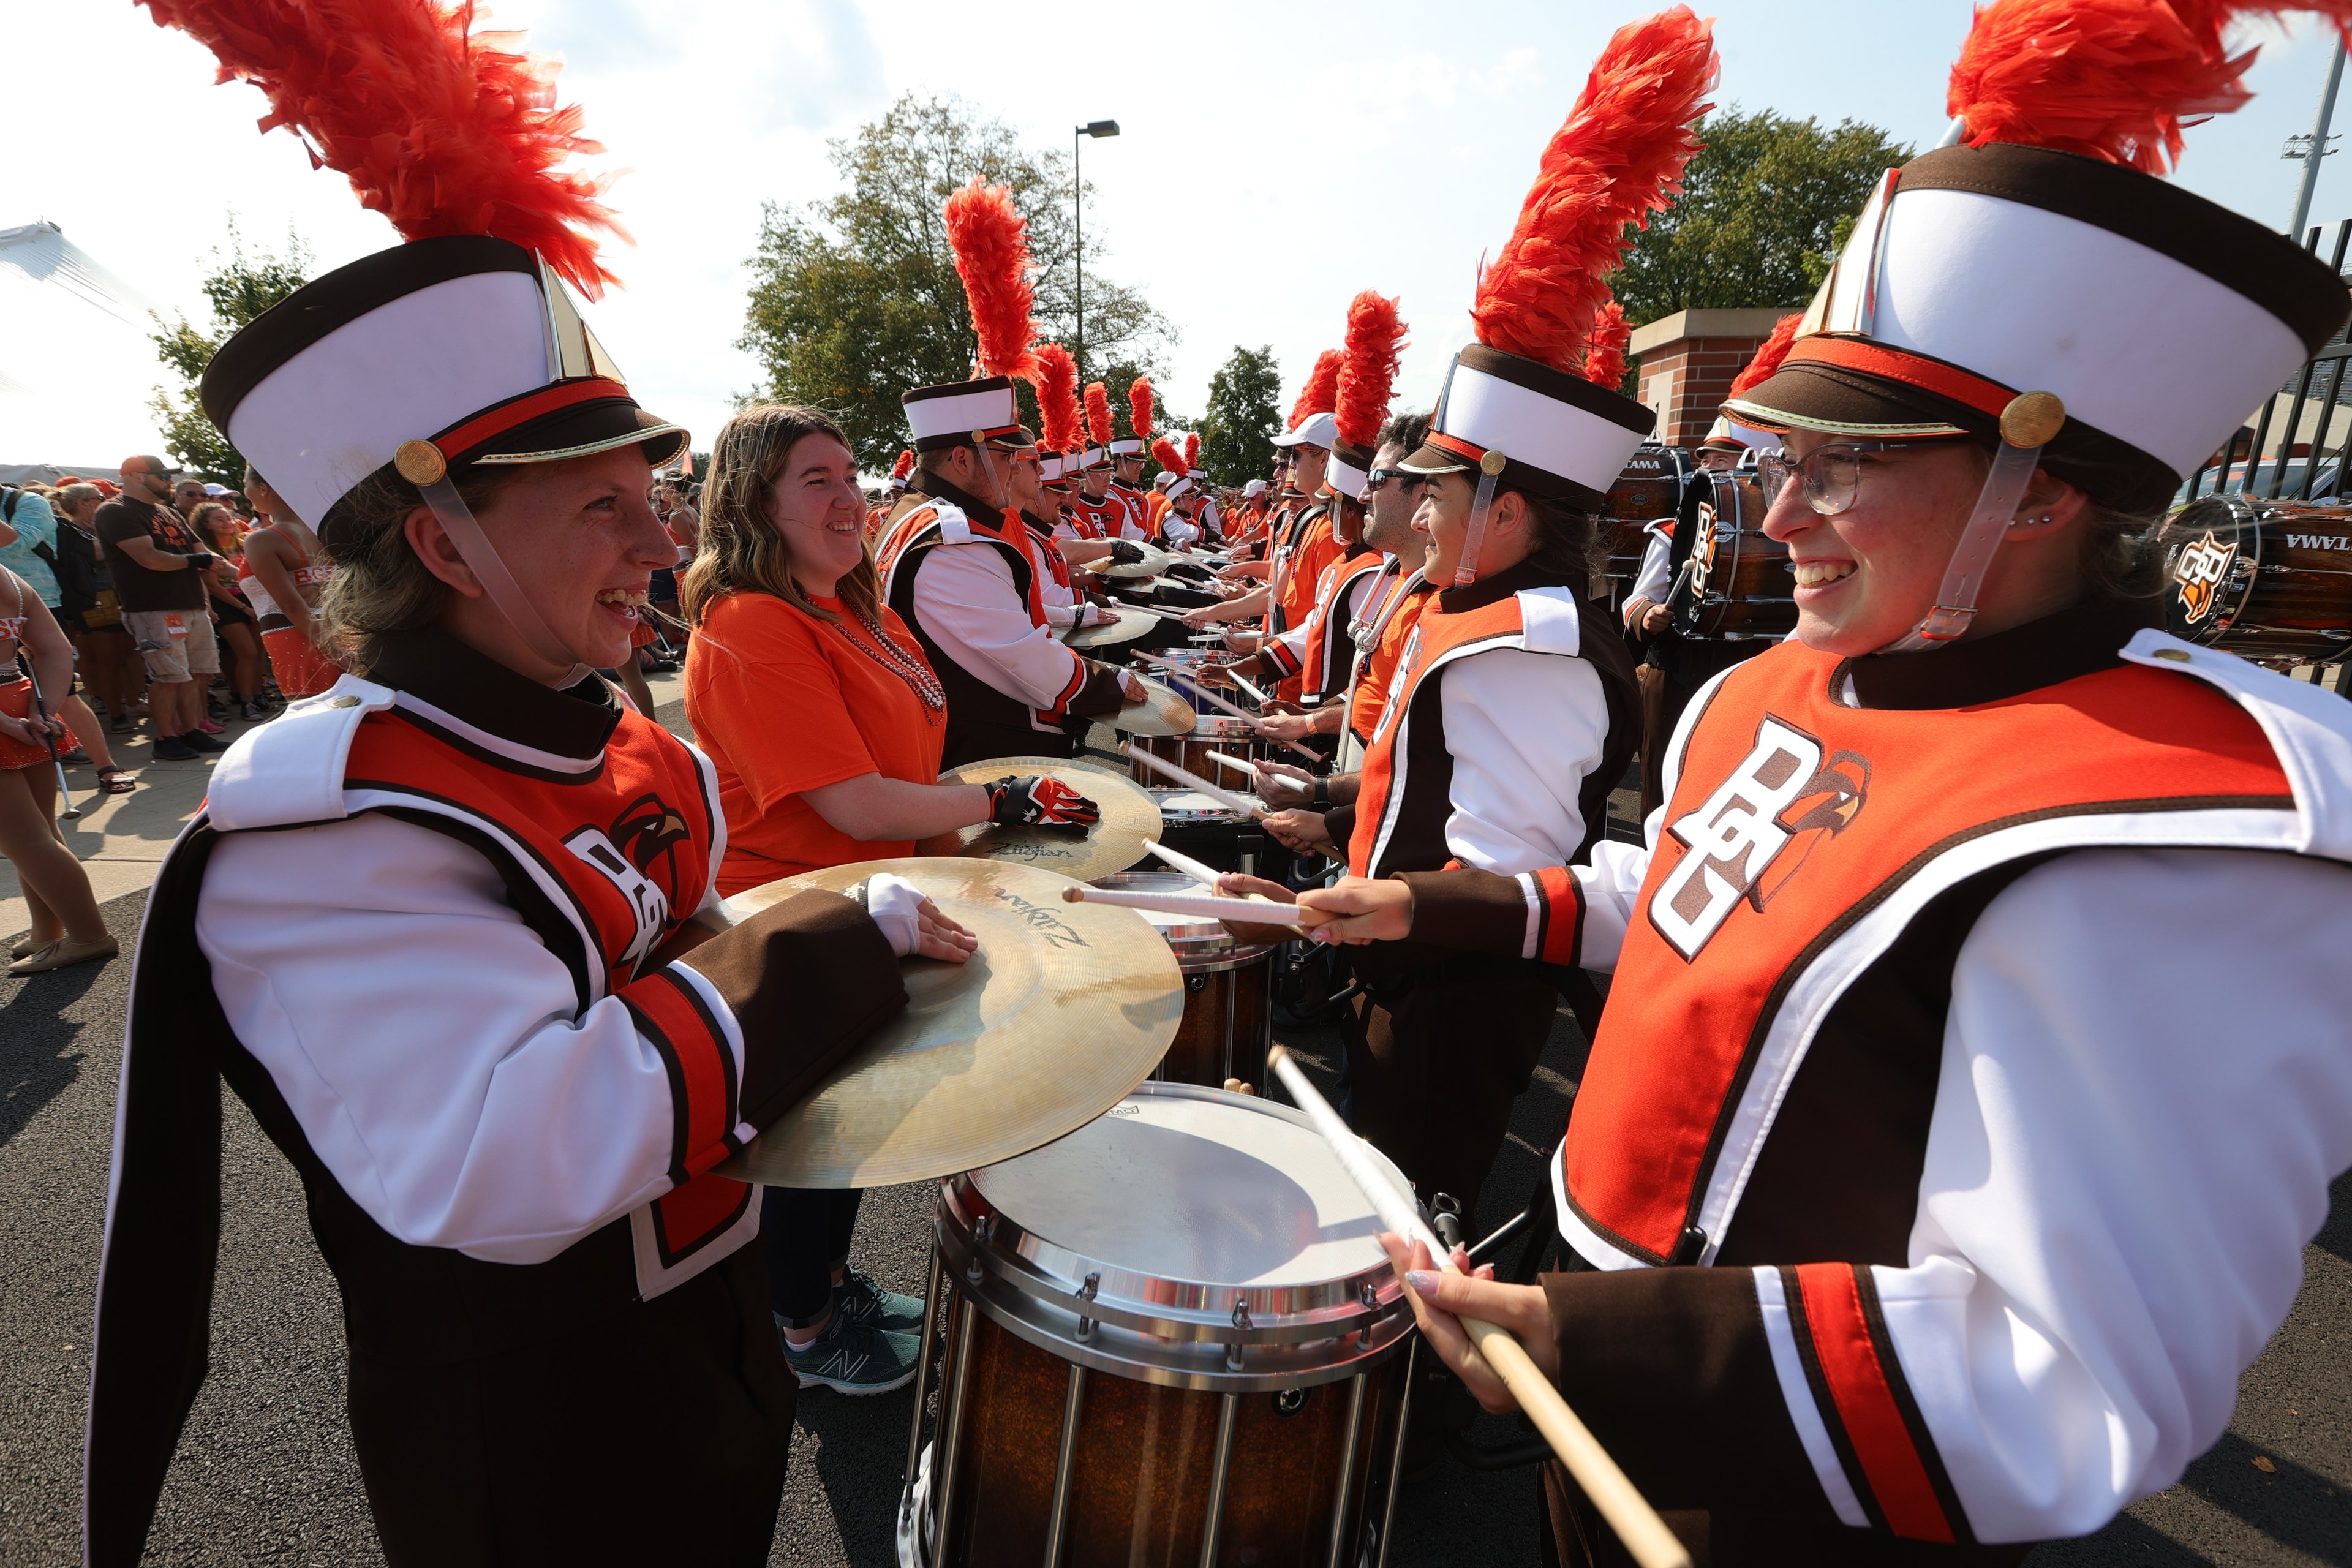 In photos BGSU marks a milestone of memories with 100 years of